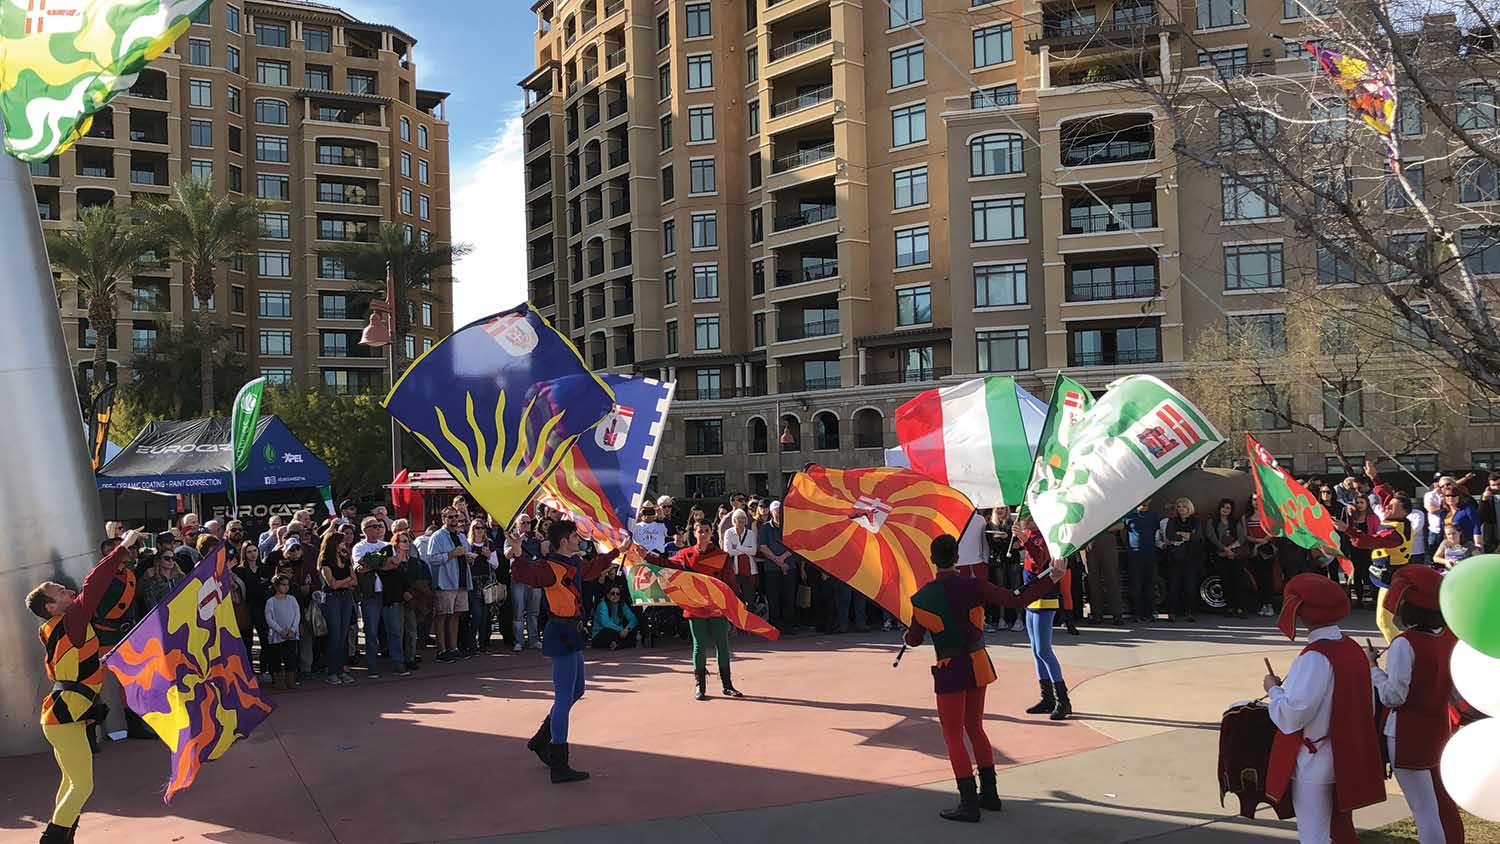 Festival brings Italian culture to downtown